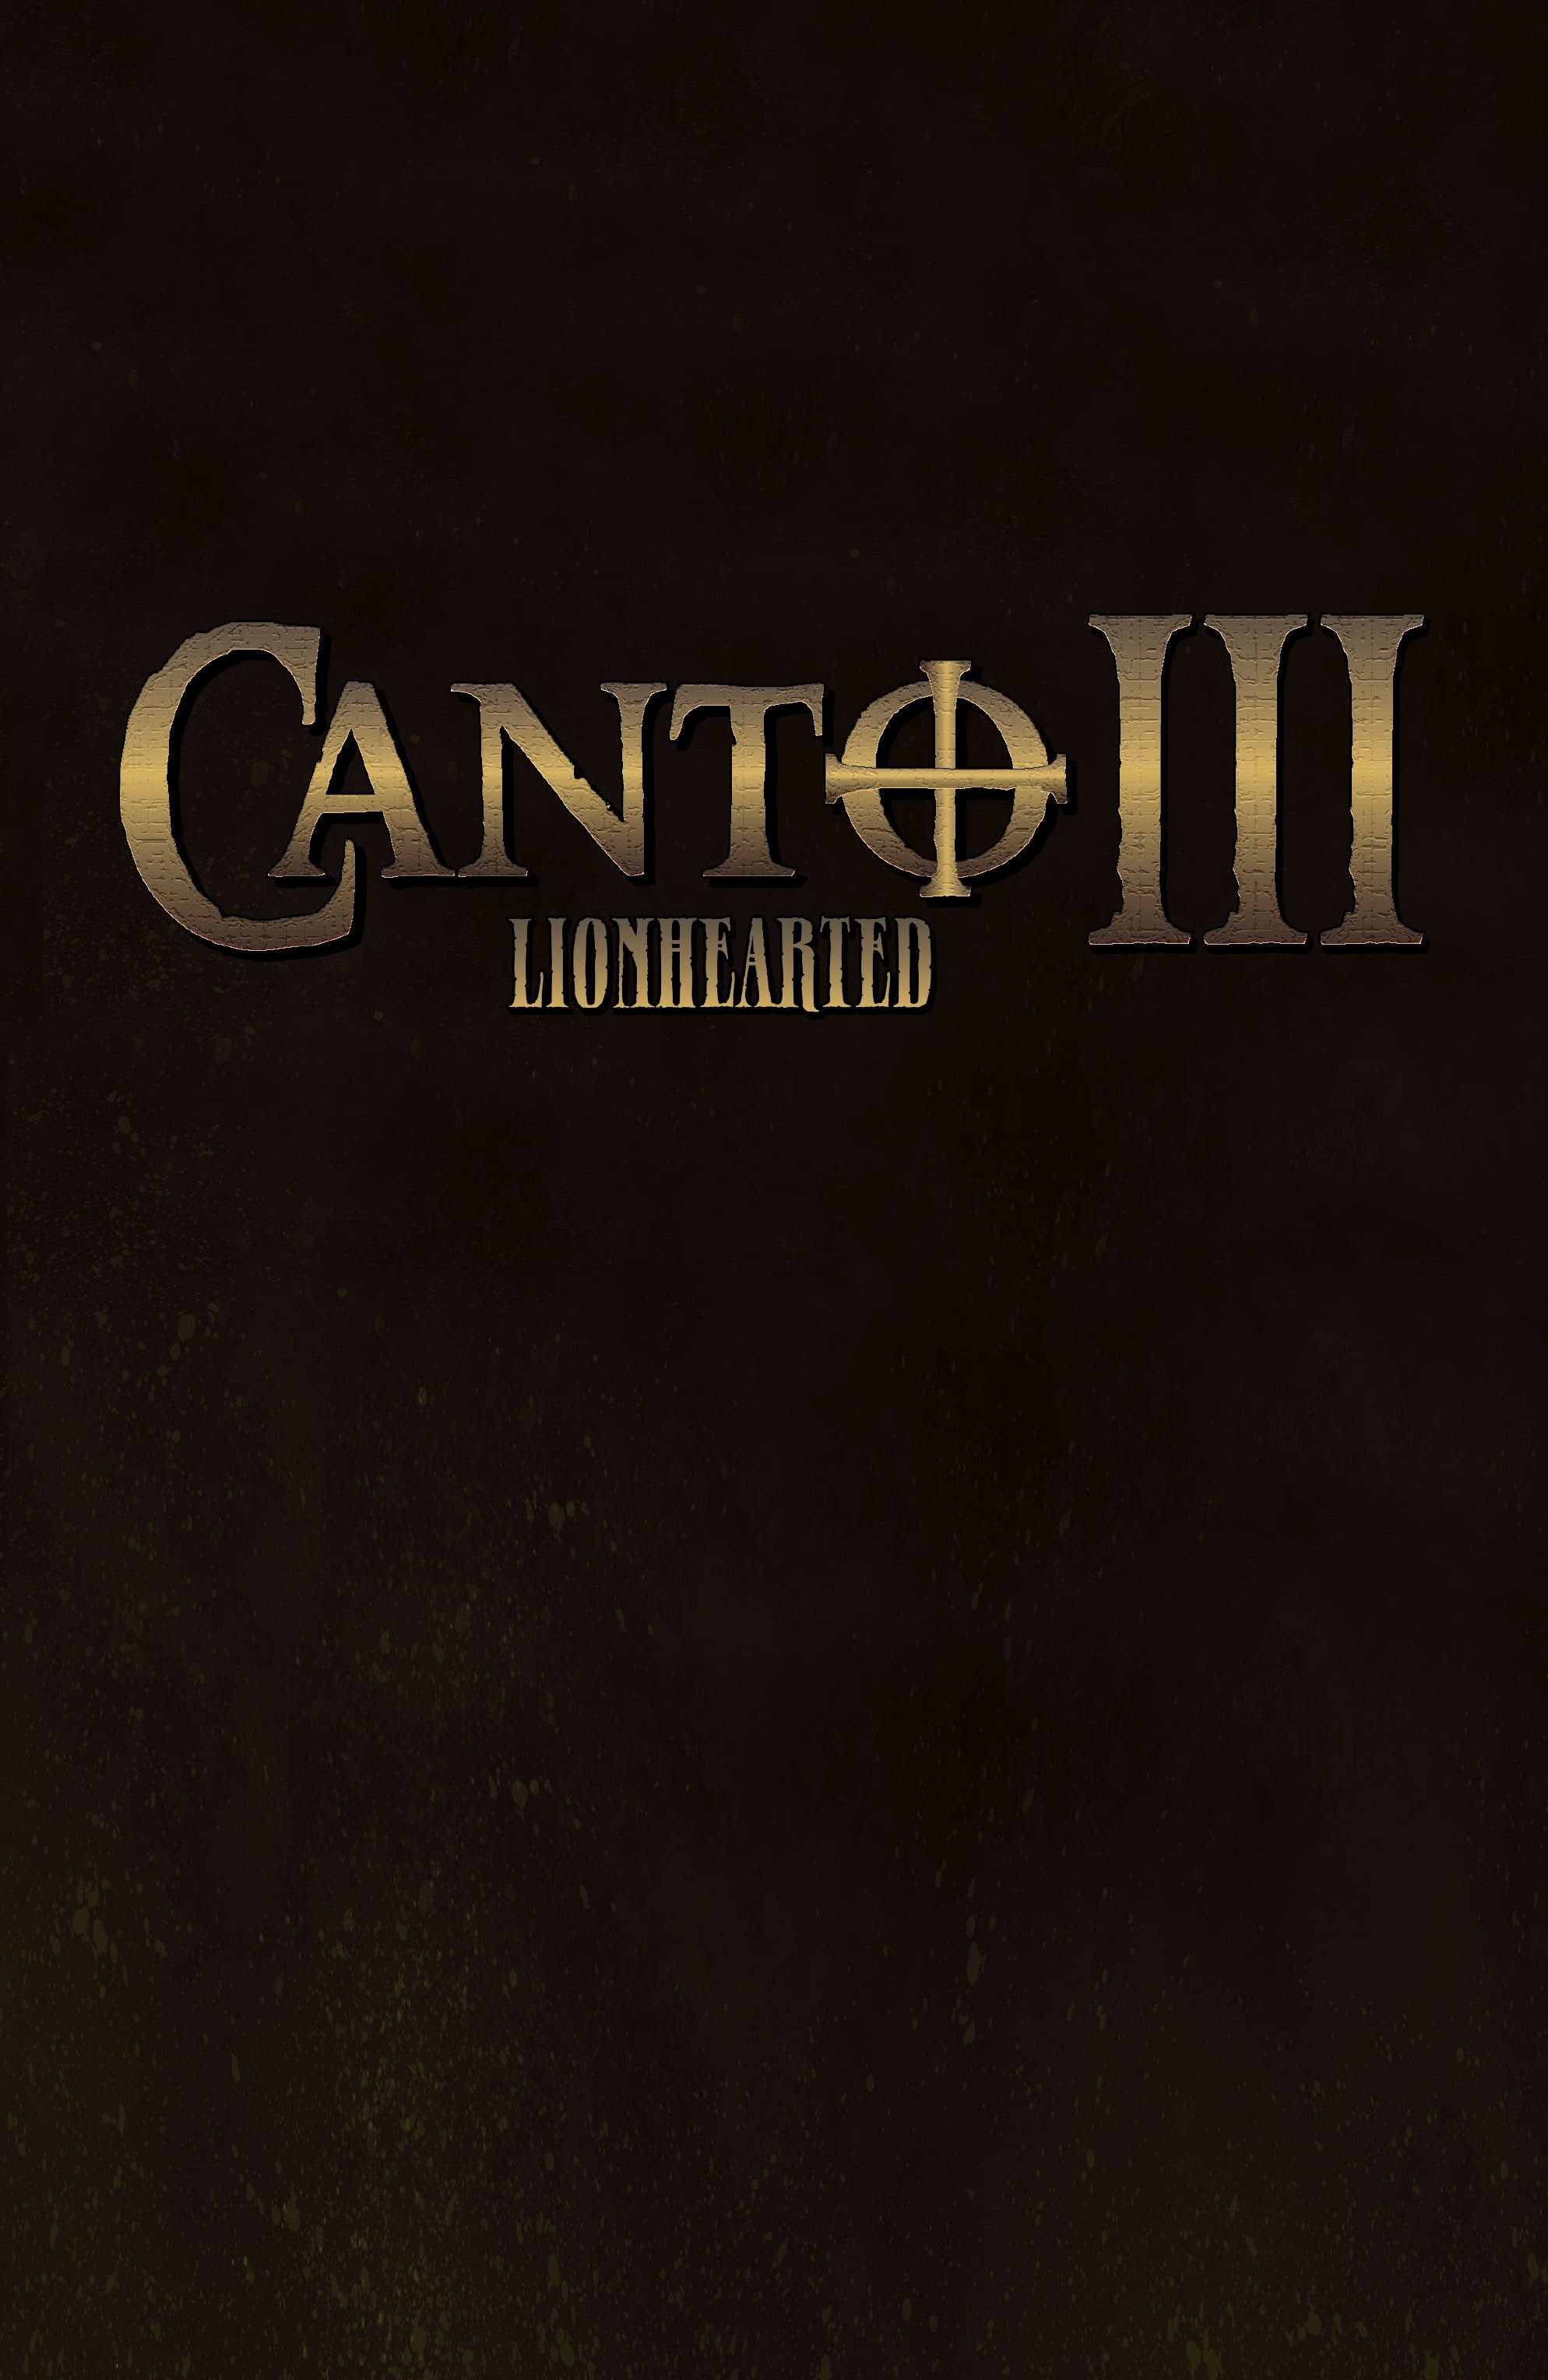 Read online Canto III: Lionhearted comic -  Issue #2 - 31